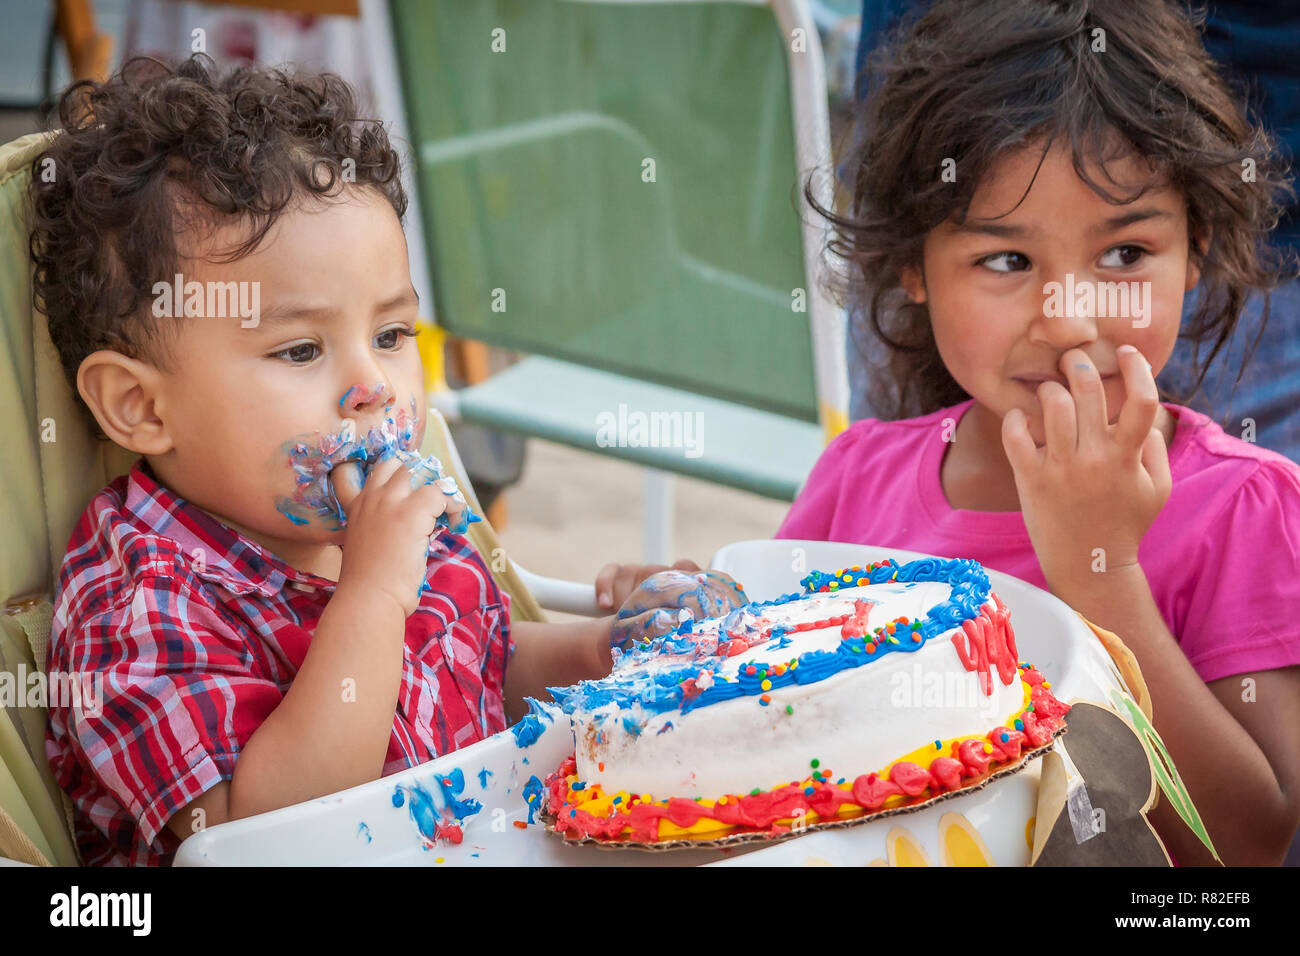 A toddler sets on a baby high chair eating cake with his sister next to him helping. Stock Photo